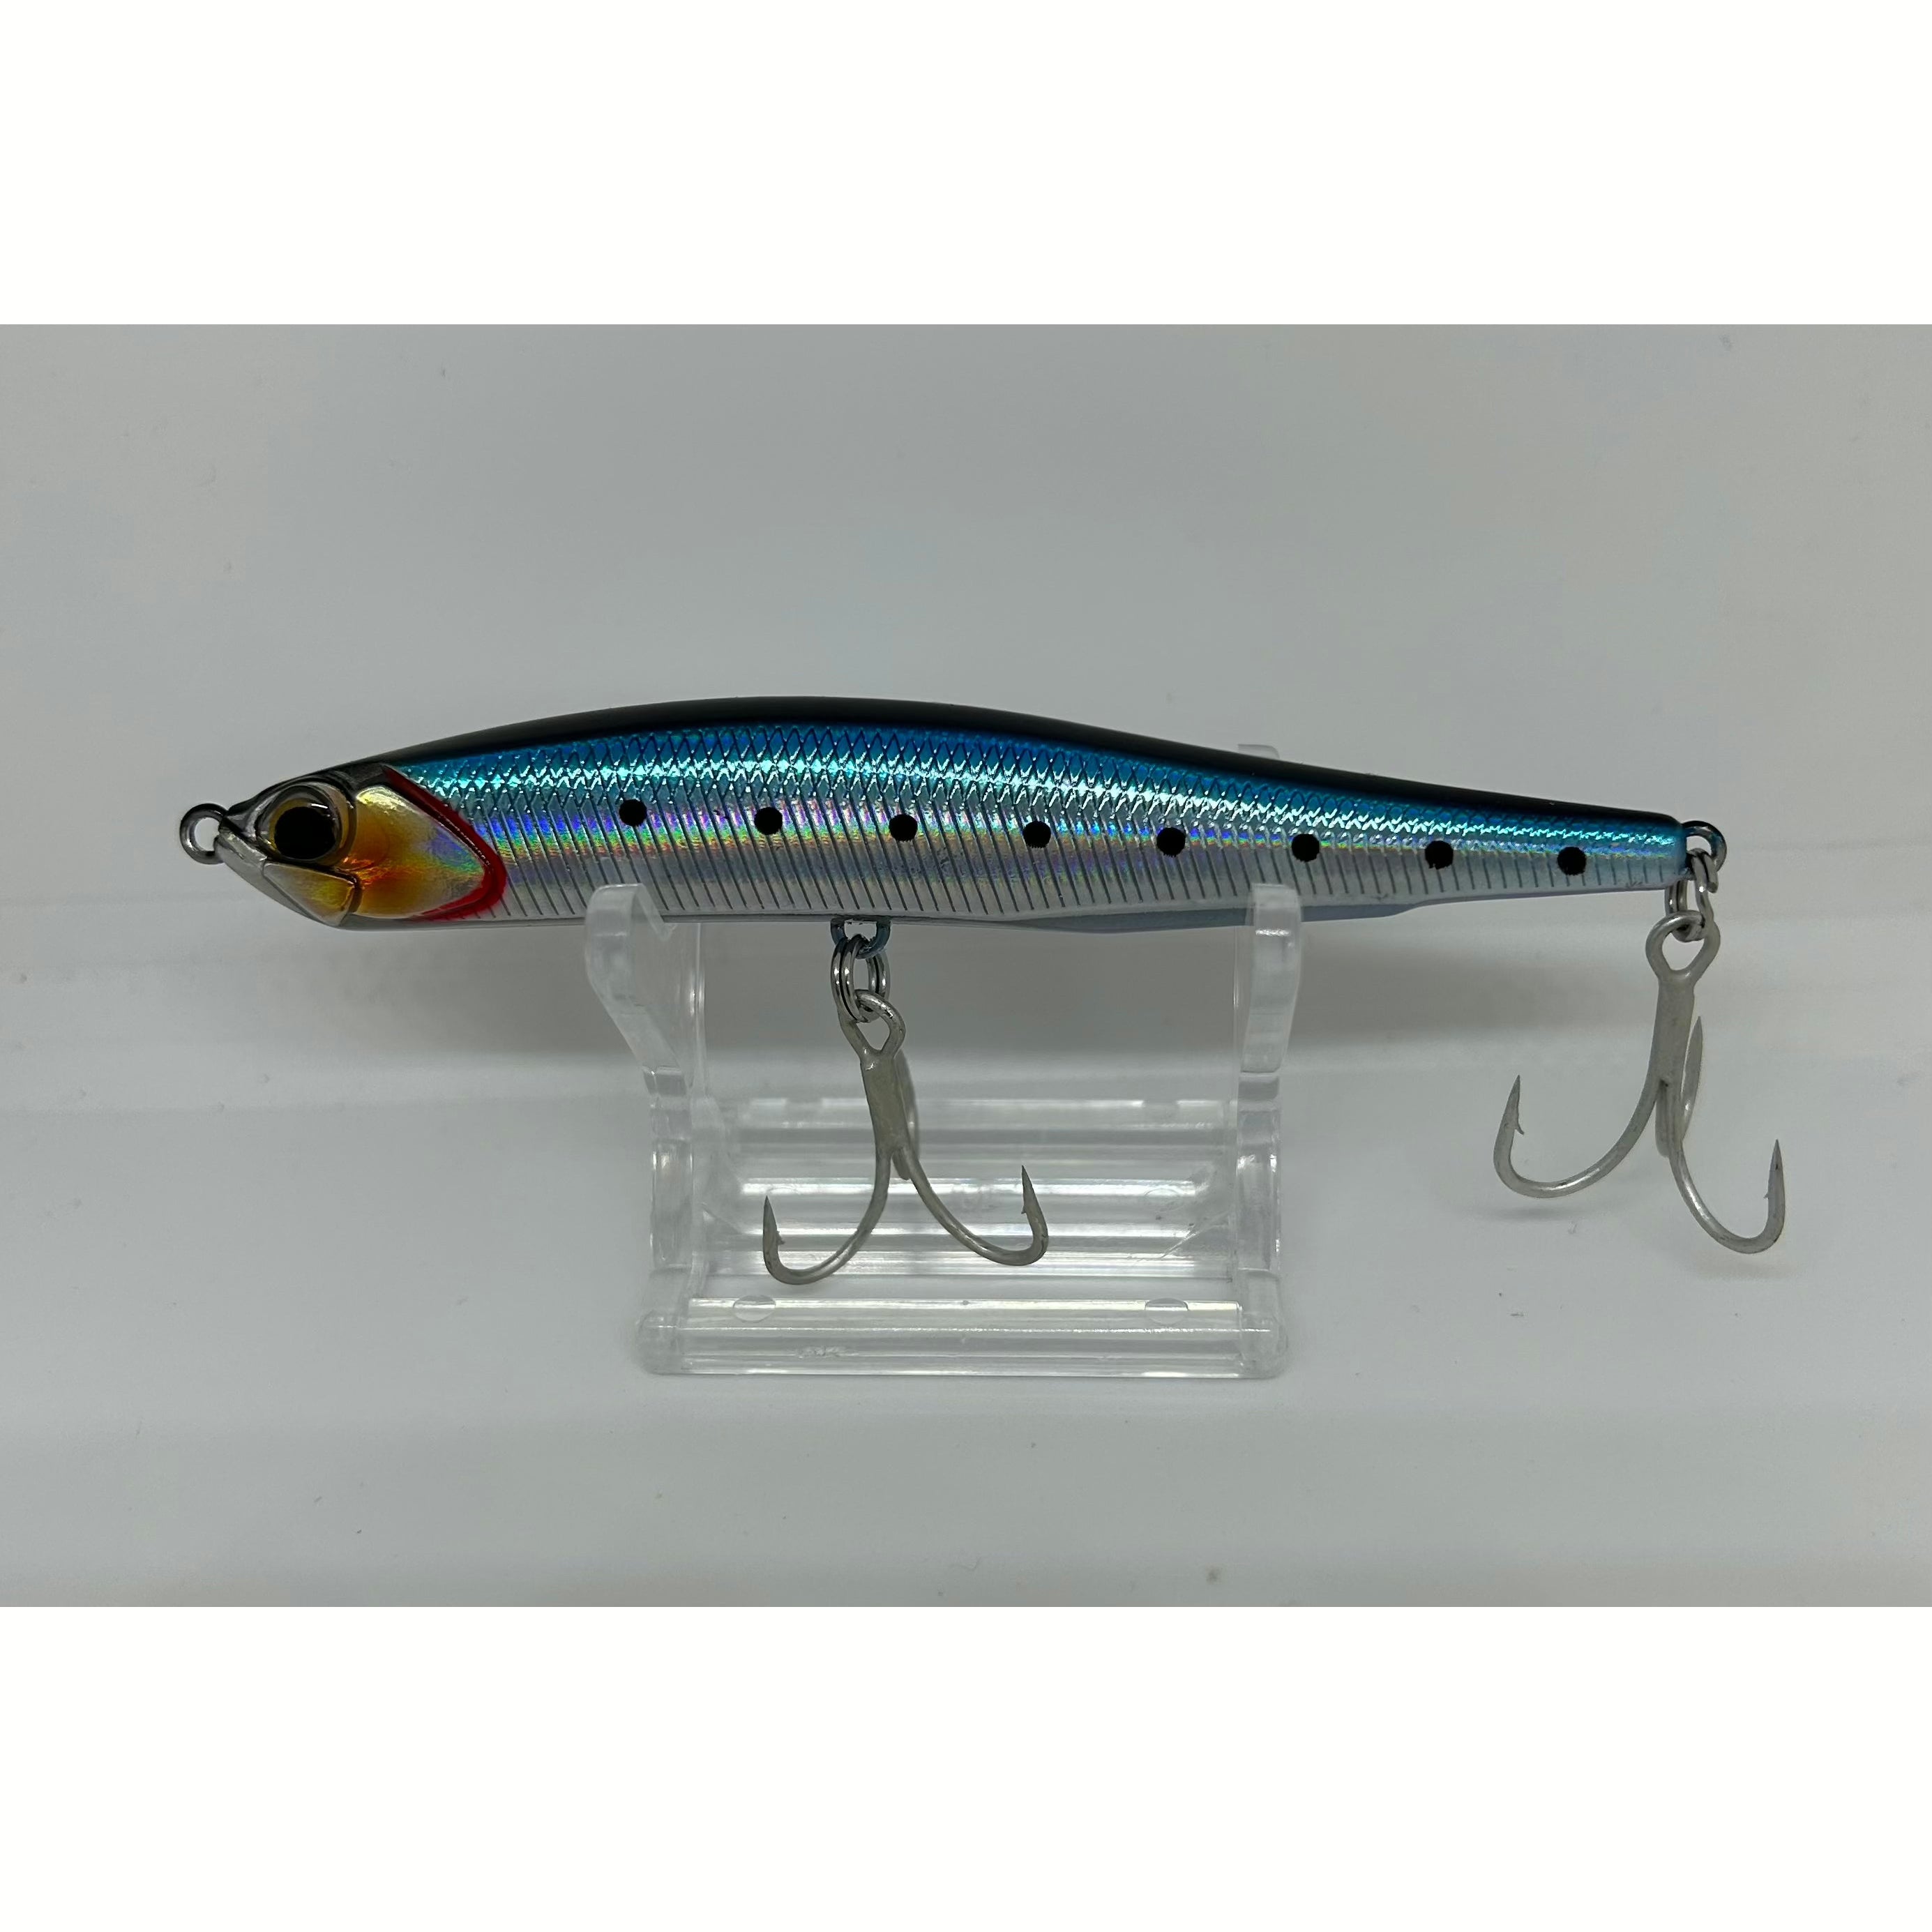 Medium & Small Long Casting Sinking “Wobblers” Bass Lures